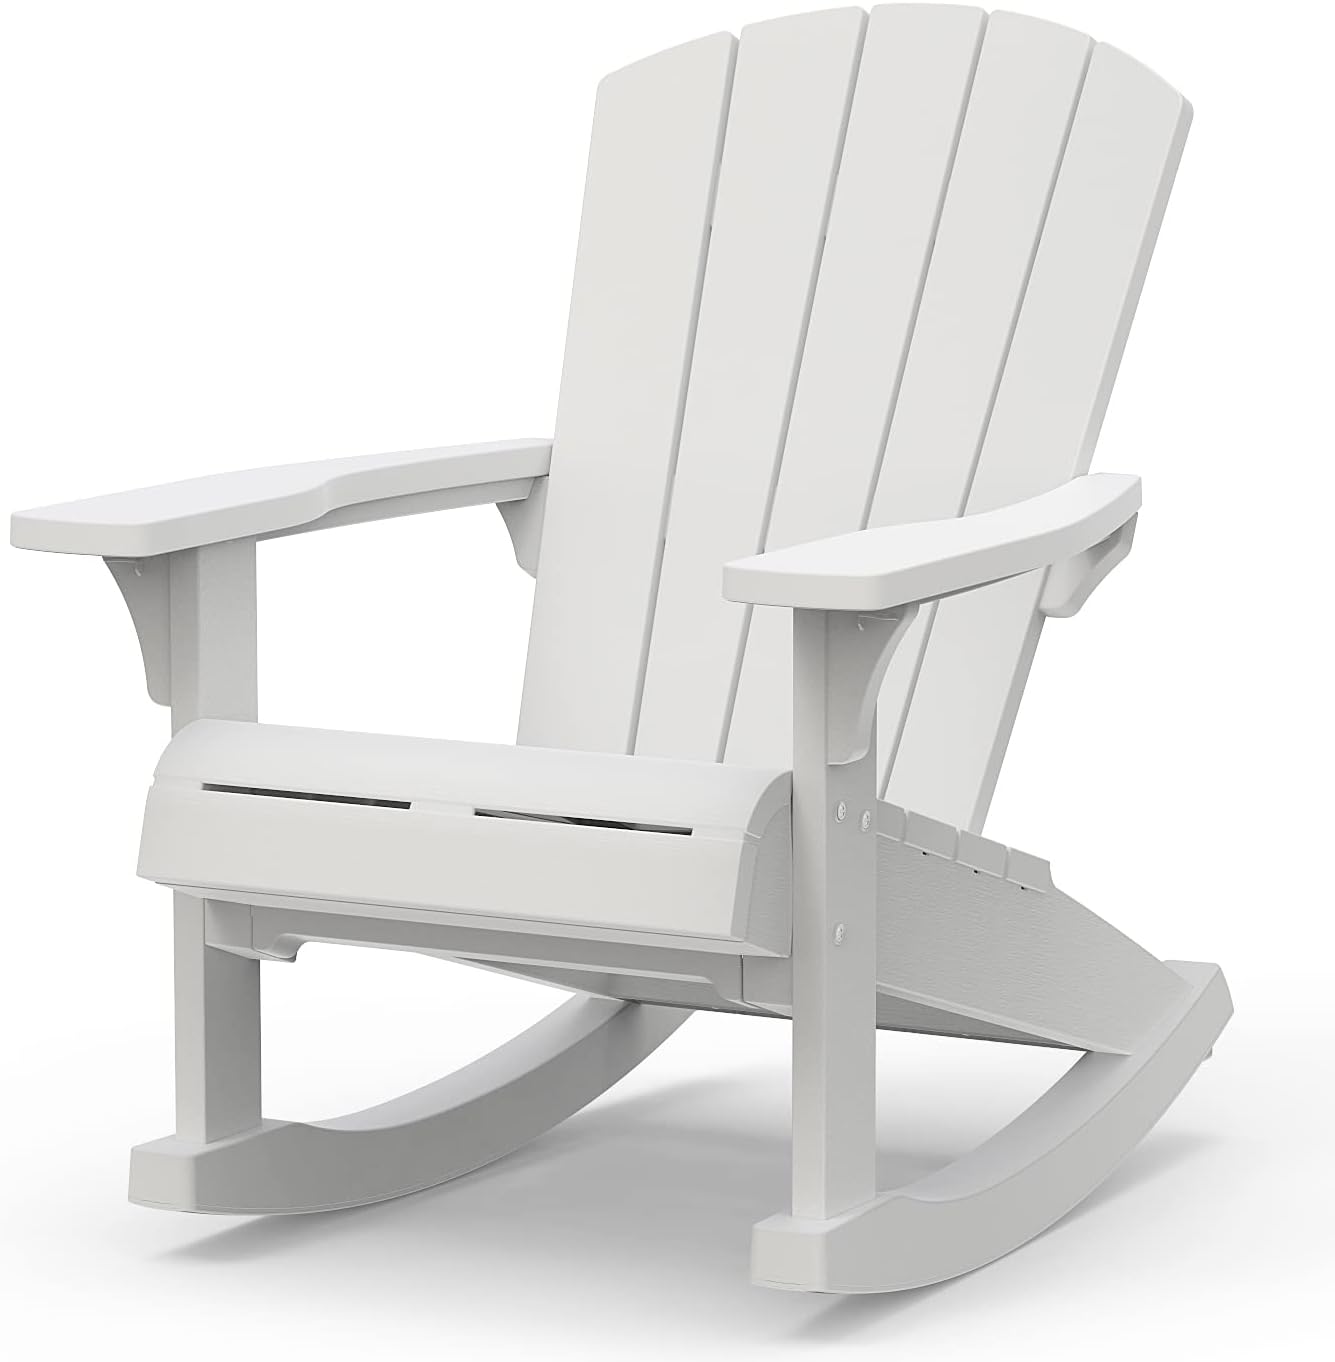 Keter Adirondack Rocker Resin Outdoor Furniture Patio Chair -Perfect for Porch, Pool, and Fire Pit Seating, White